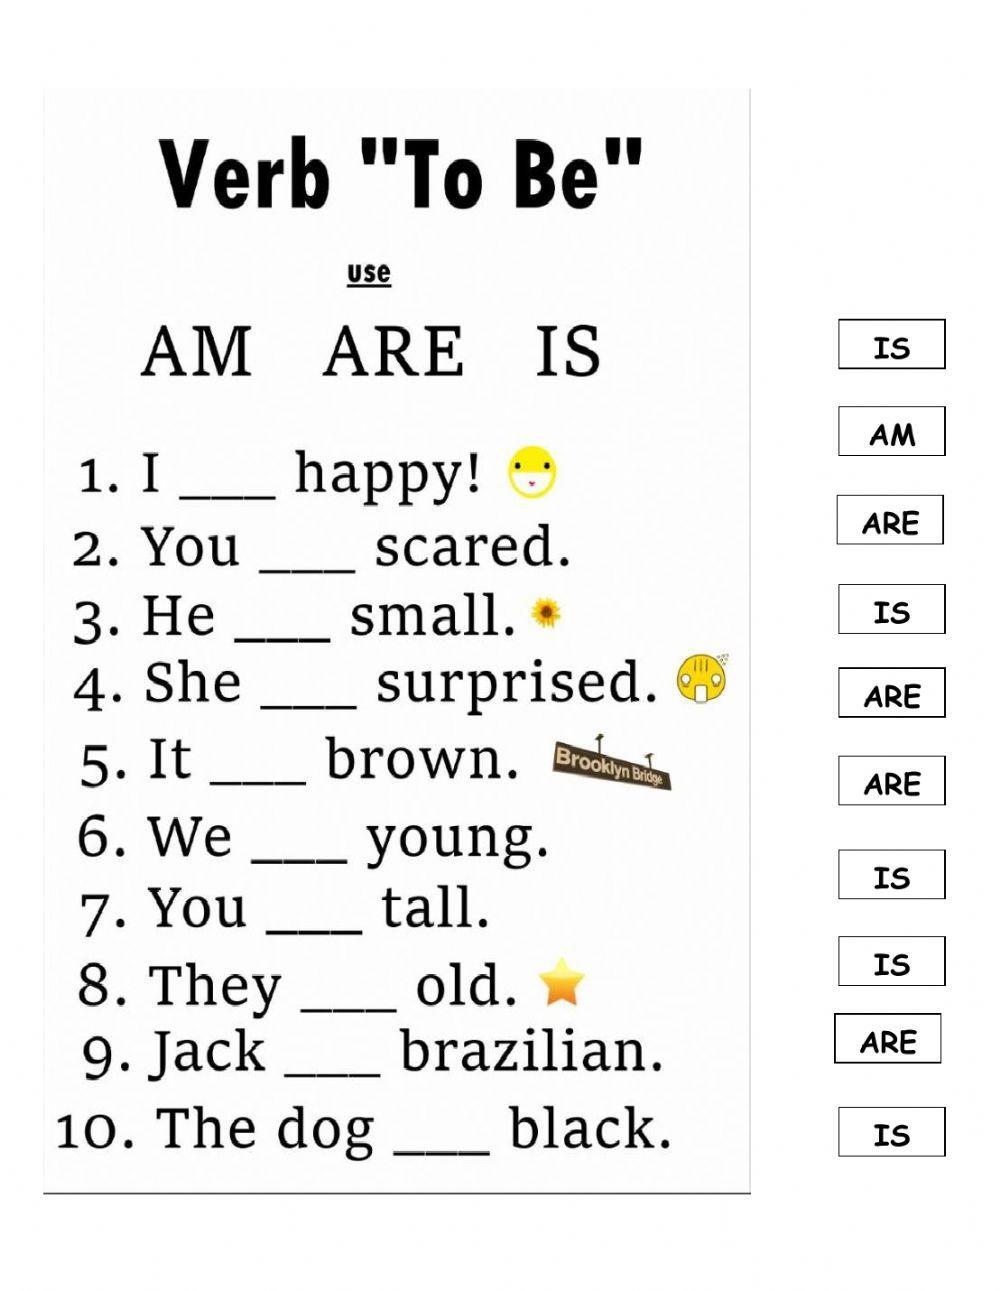 Verb TO BE - exercise1